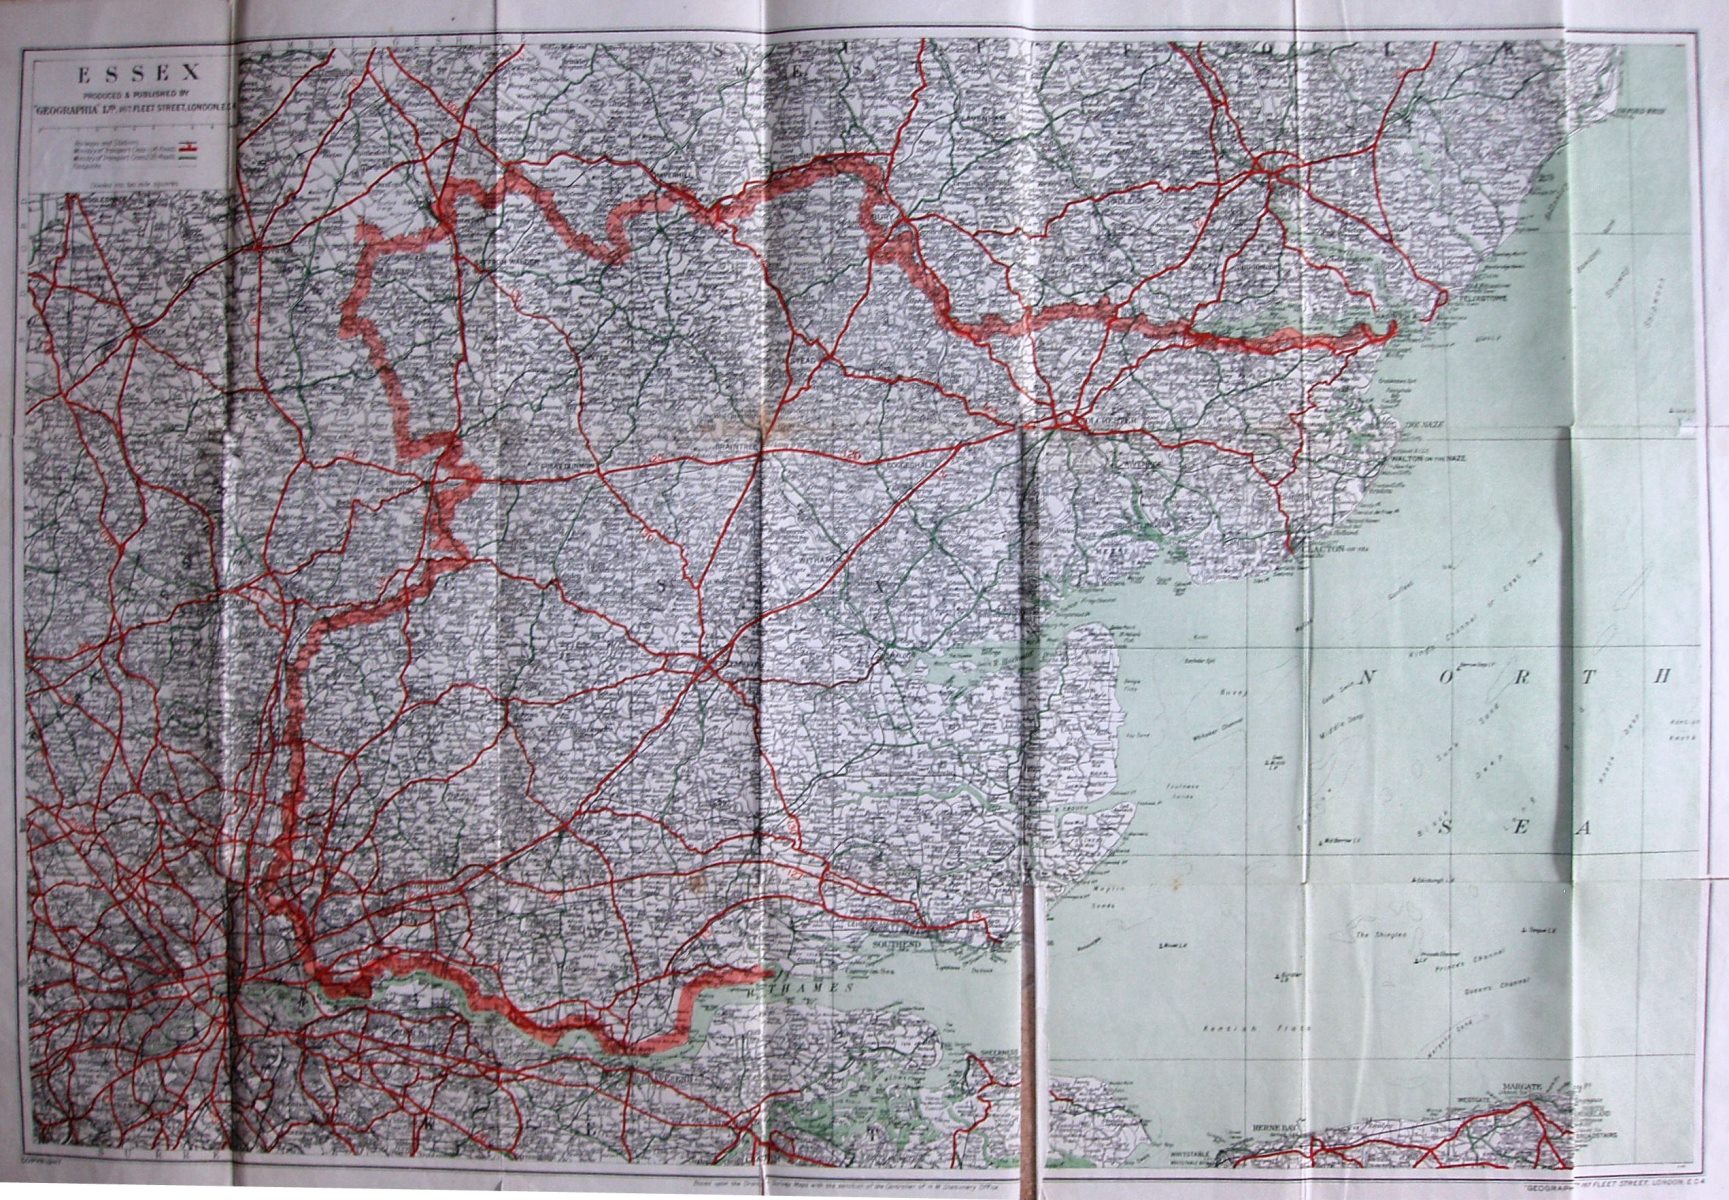 Geographia Large Scale Road Map of Essex, 1946